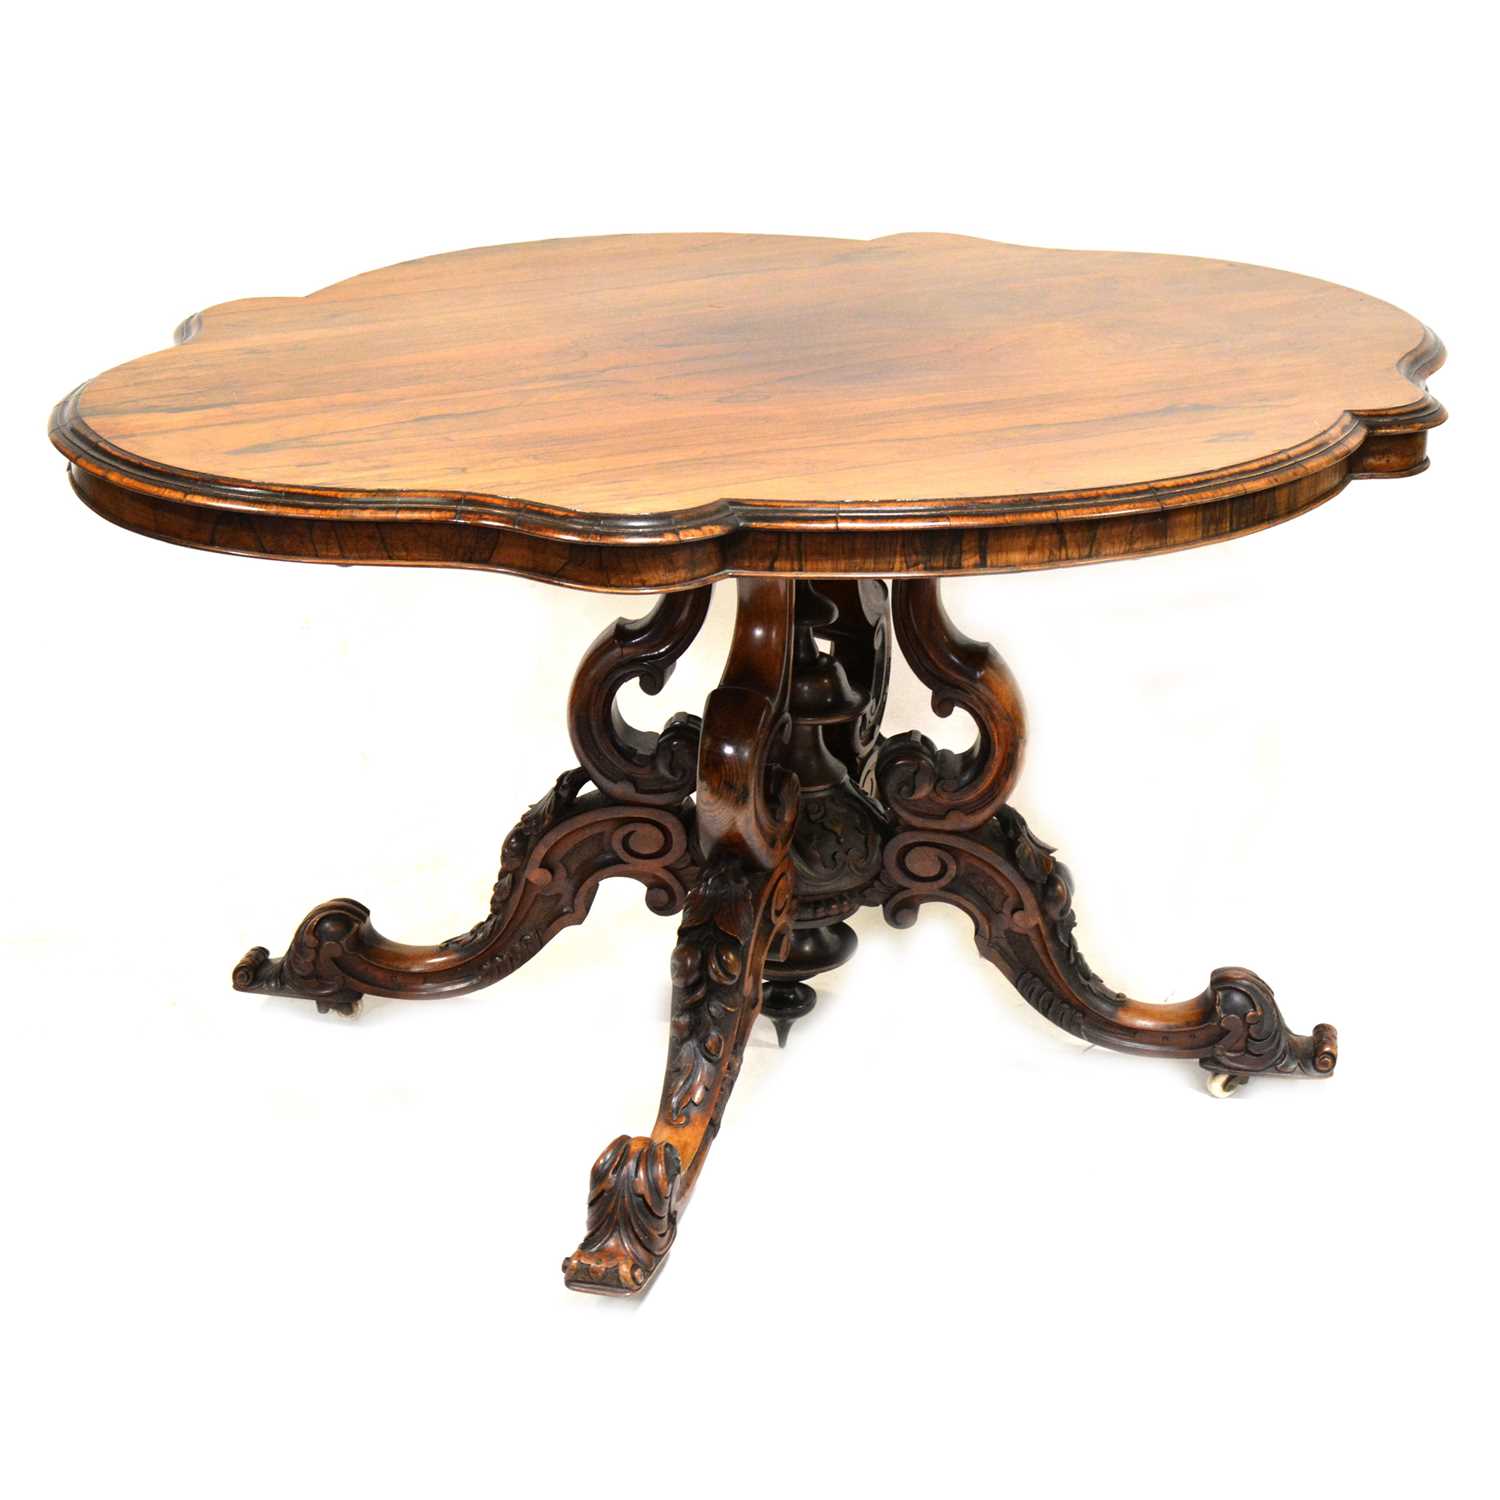 Victorian walnut and rosewood dining table,